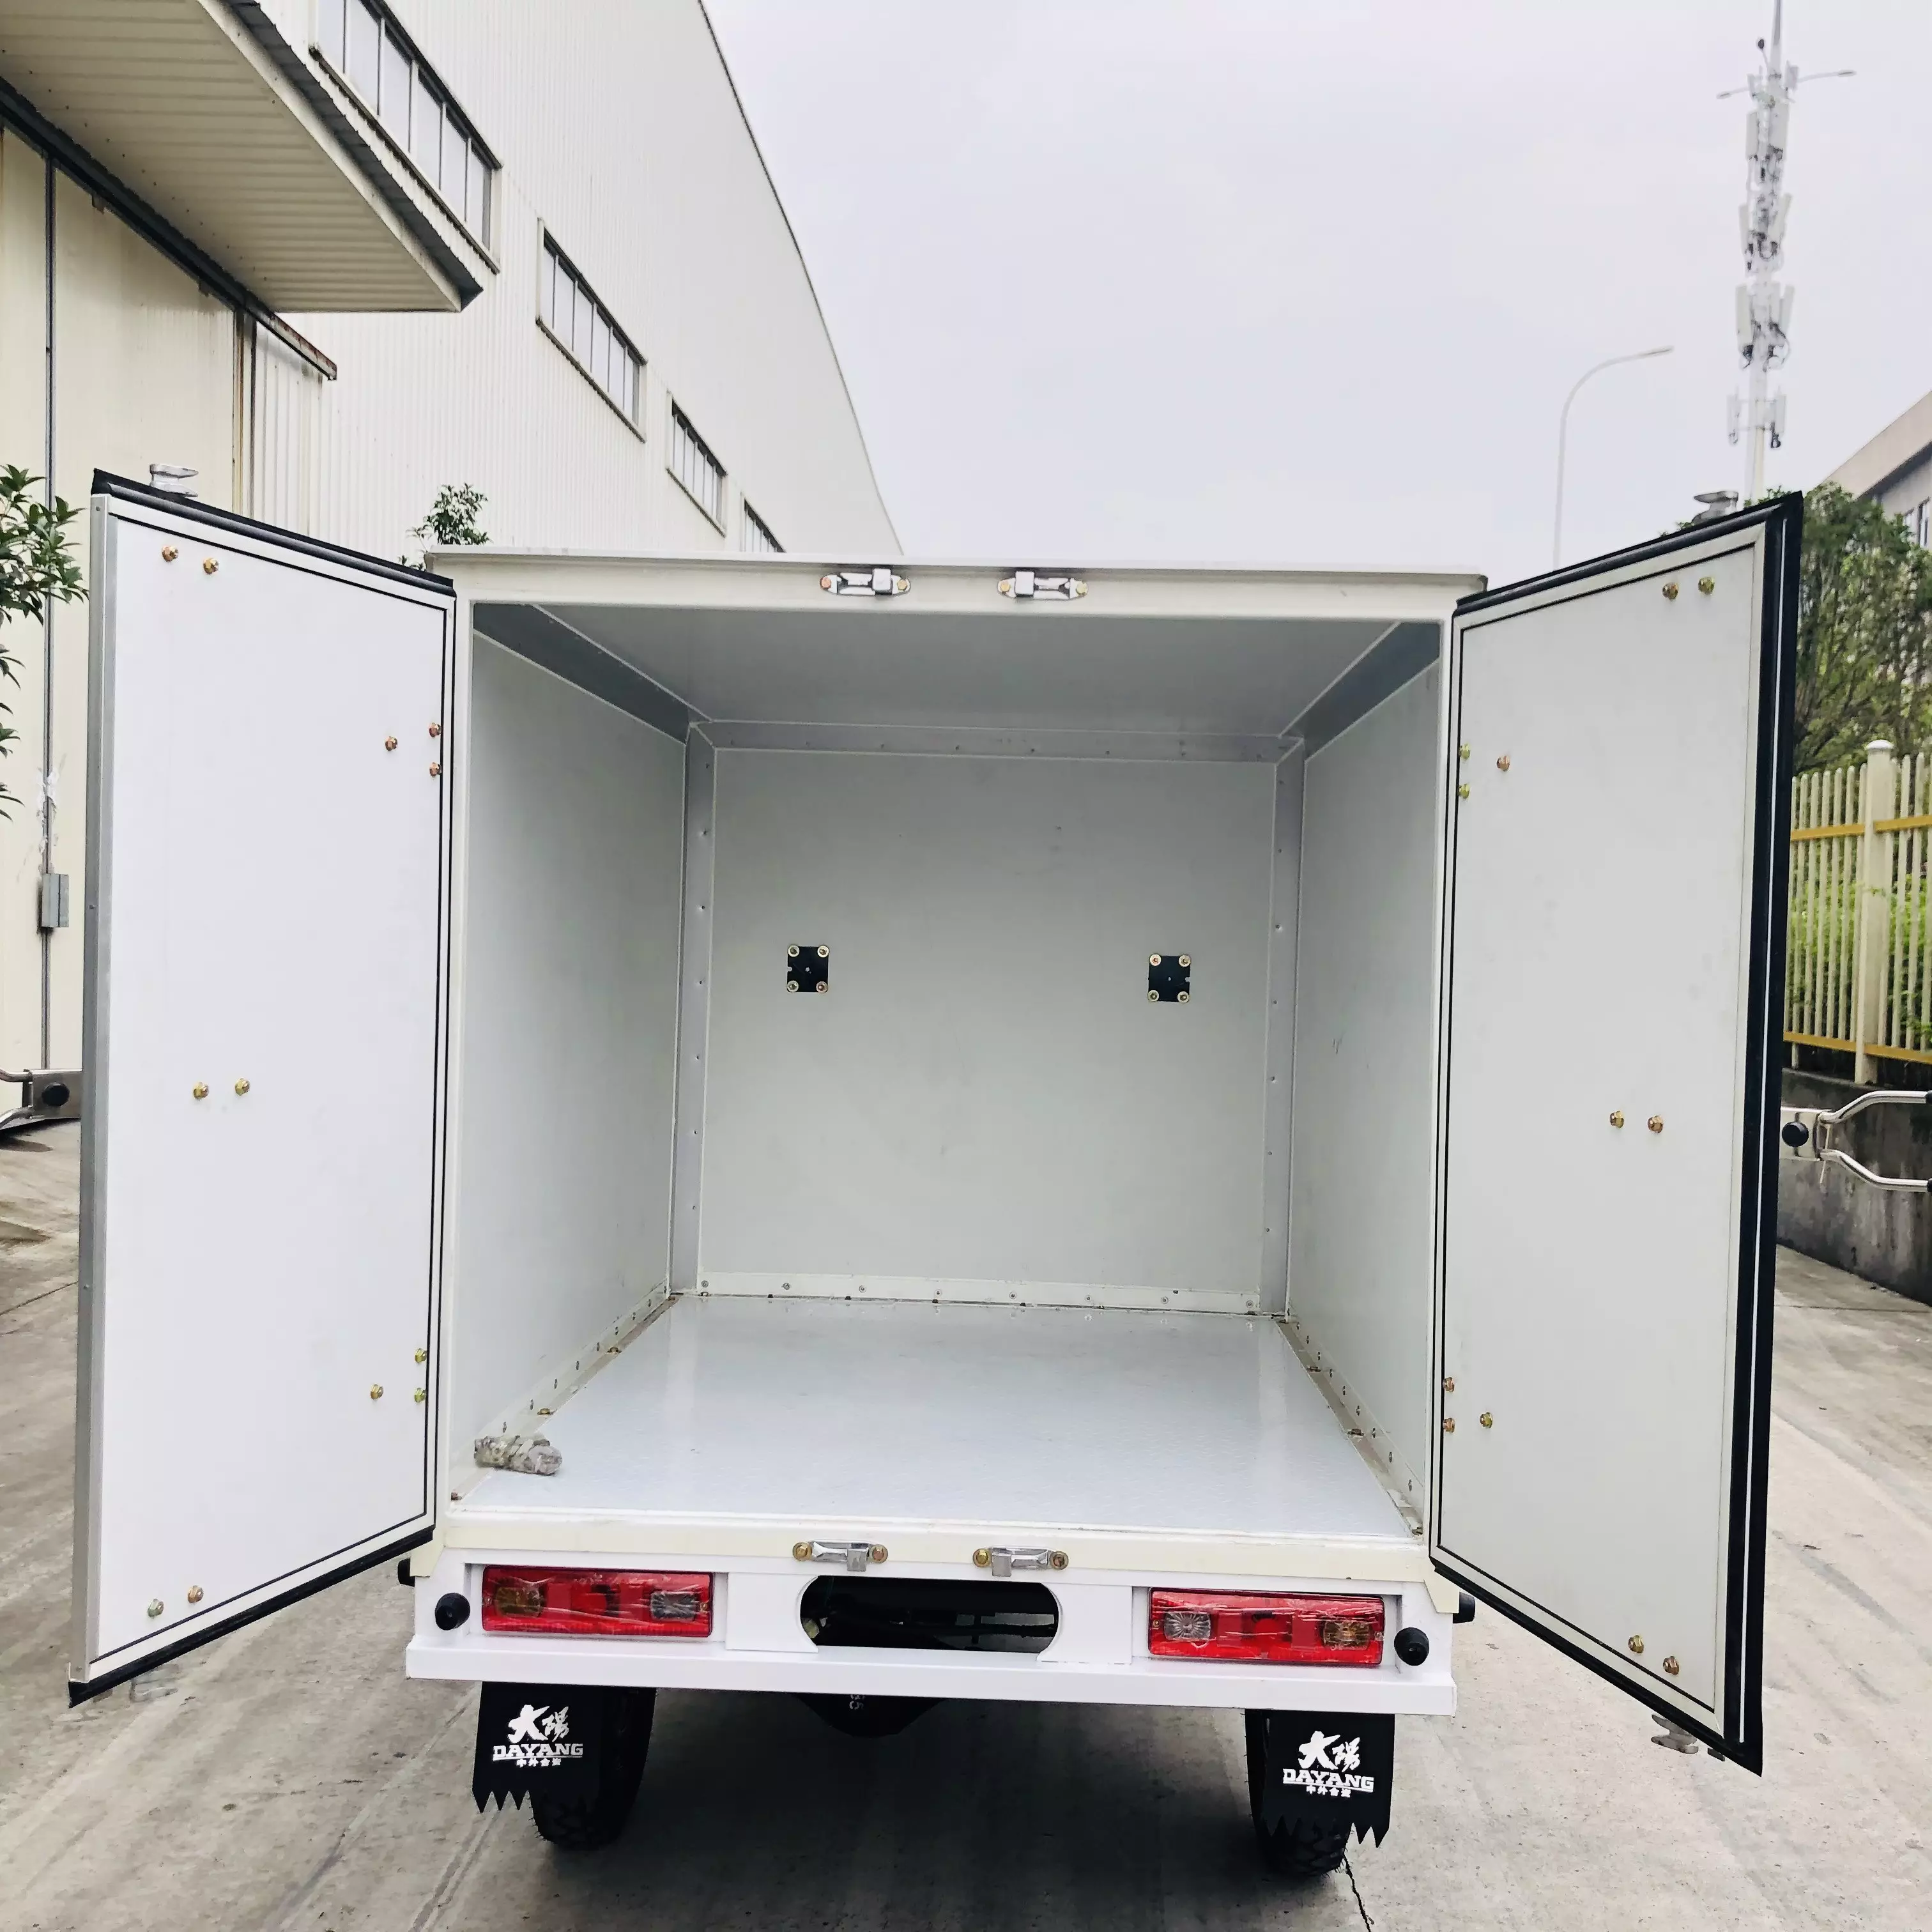 200cc High Quality Engine single Cylinder Air-cooled Dongba semi-floating Changan 220-strand rear axle White Body CCC Origin